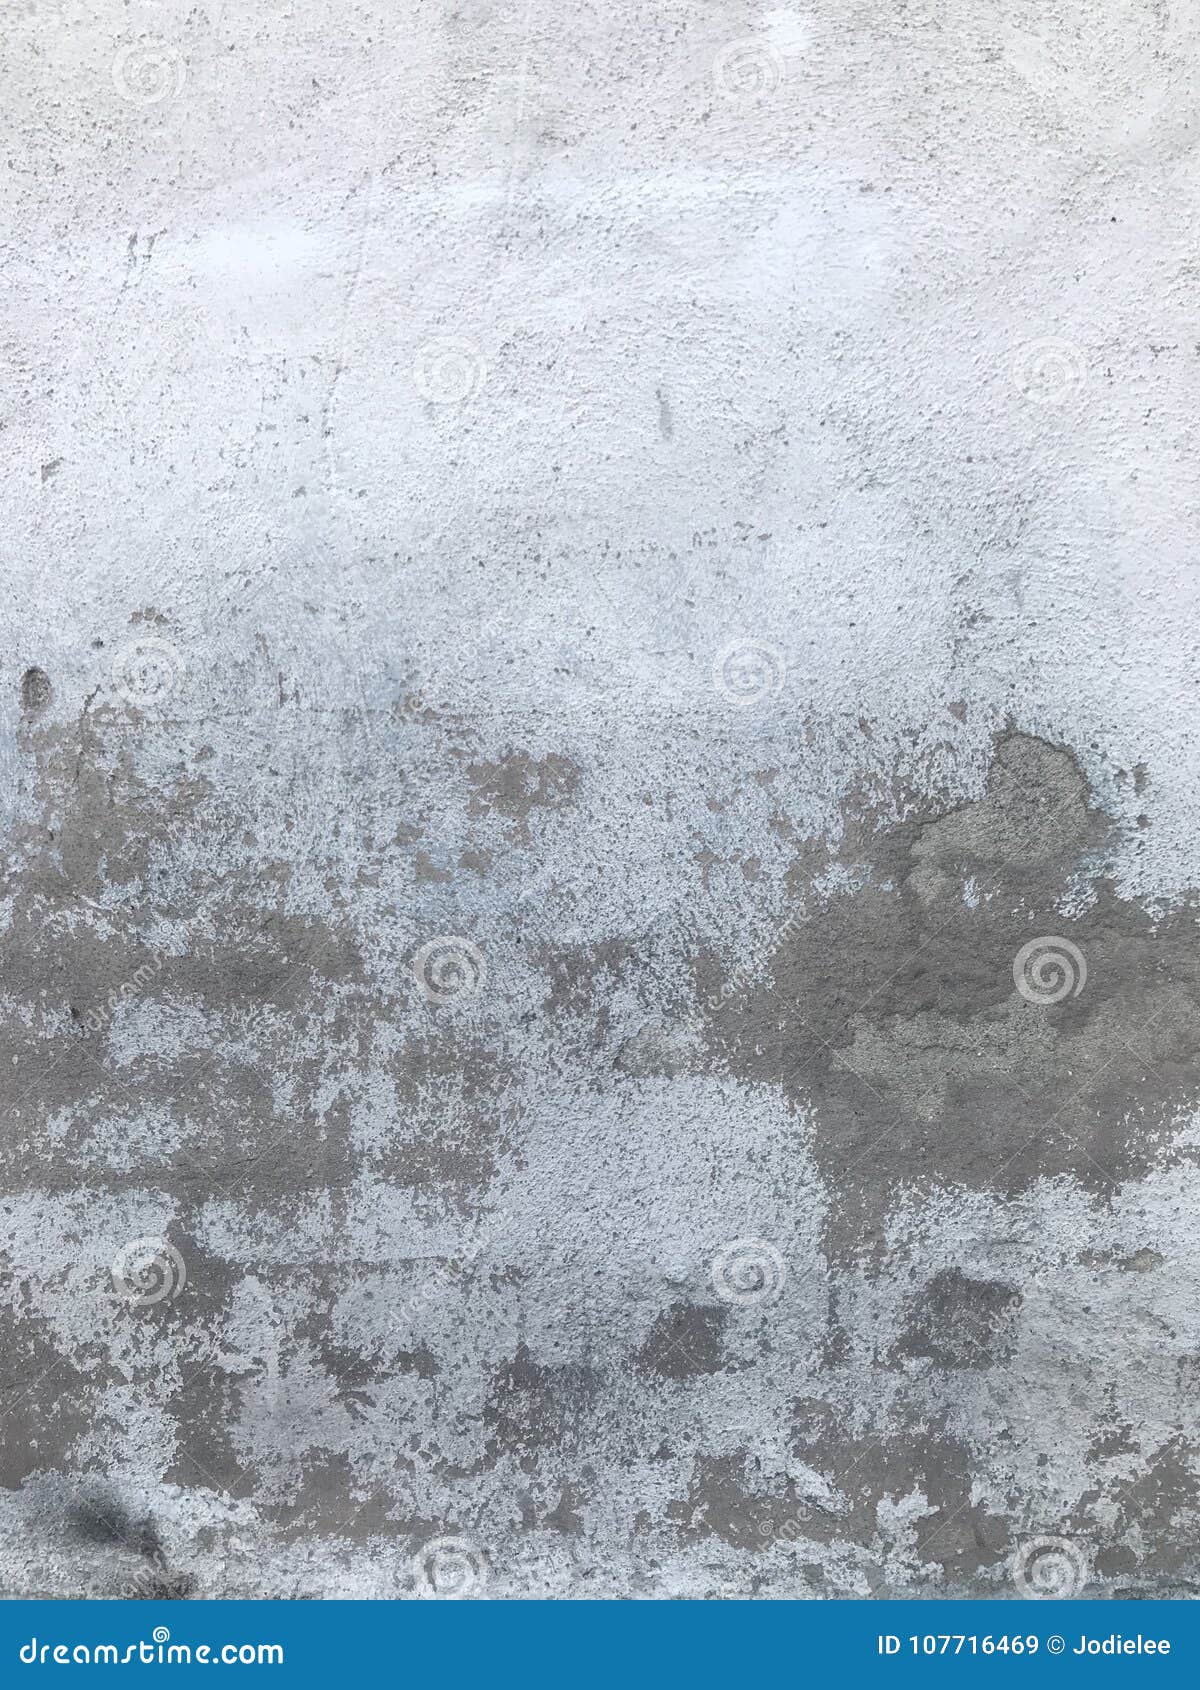 rustic grungy urban city cement wall background texture